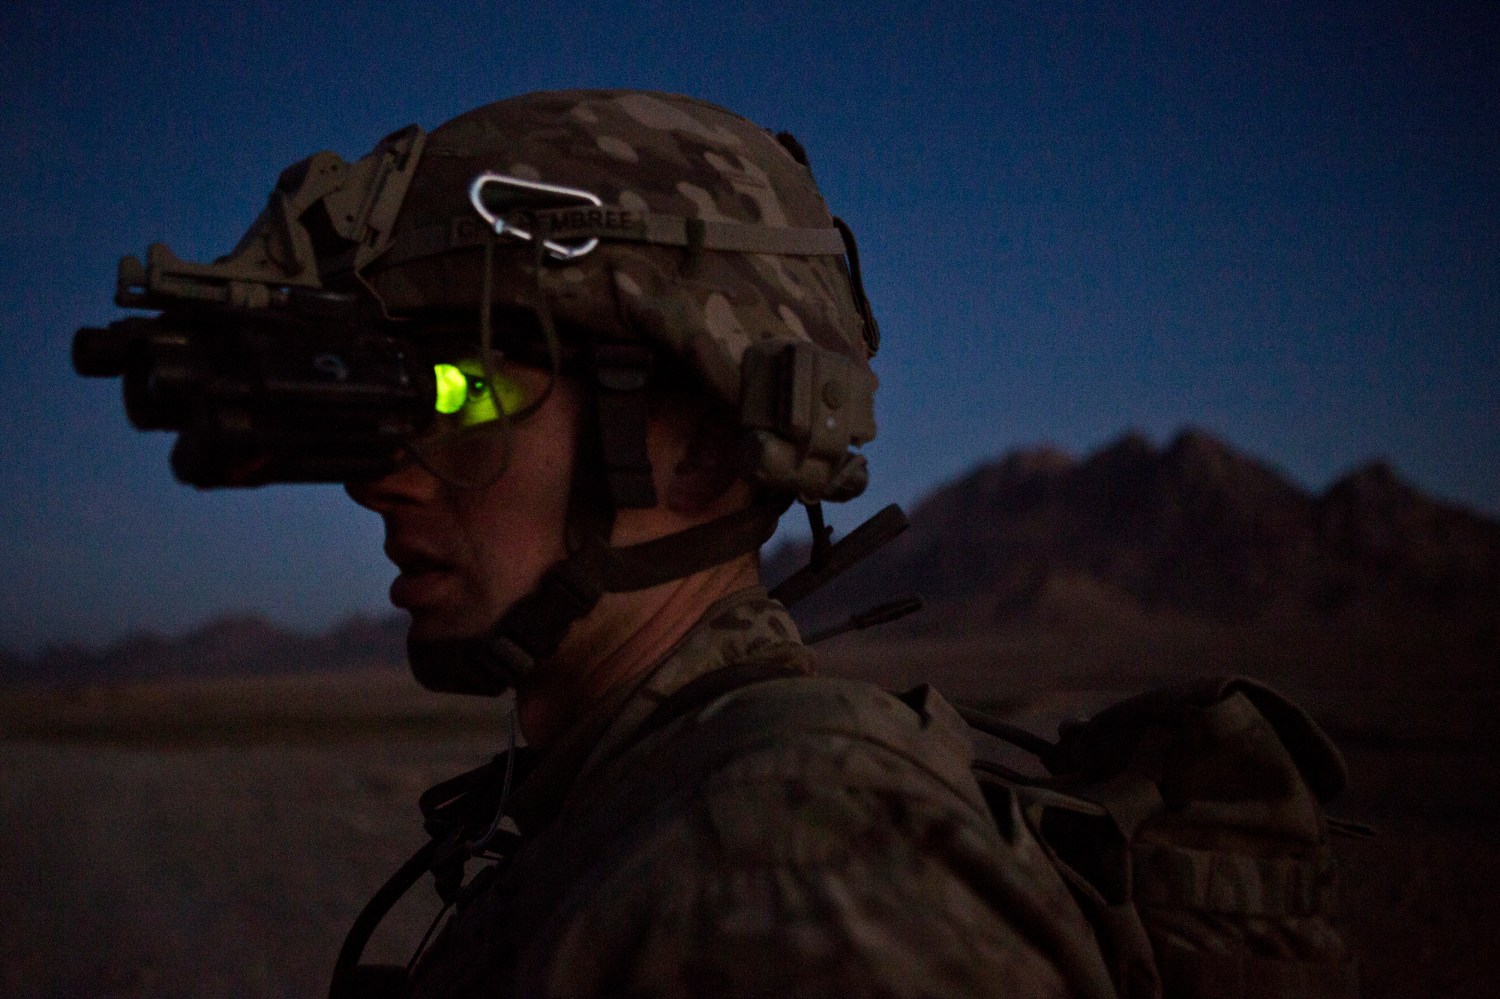 A soldier from the U.S. Army's 1st Platoon, Alpha Company, 1st Battalion, 36th Infantry Regiment, uses night vision goggles as soldiers meet with members of the Afghan local police at a checkpoint near Combat Outpost Hutal in Maywand District, Kandahar Province, Afghanistan, January 20, 2013. REUTERS/Andrew Burton (AFGHANISTAN - Tags: MILITARY) - GM1E91L04Z701